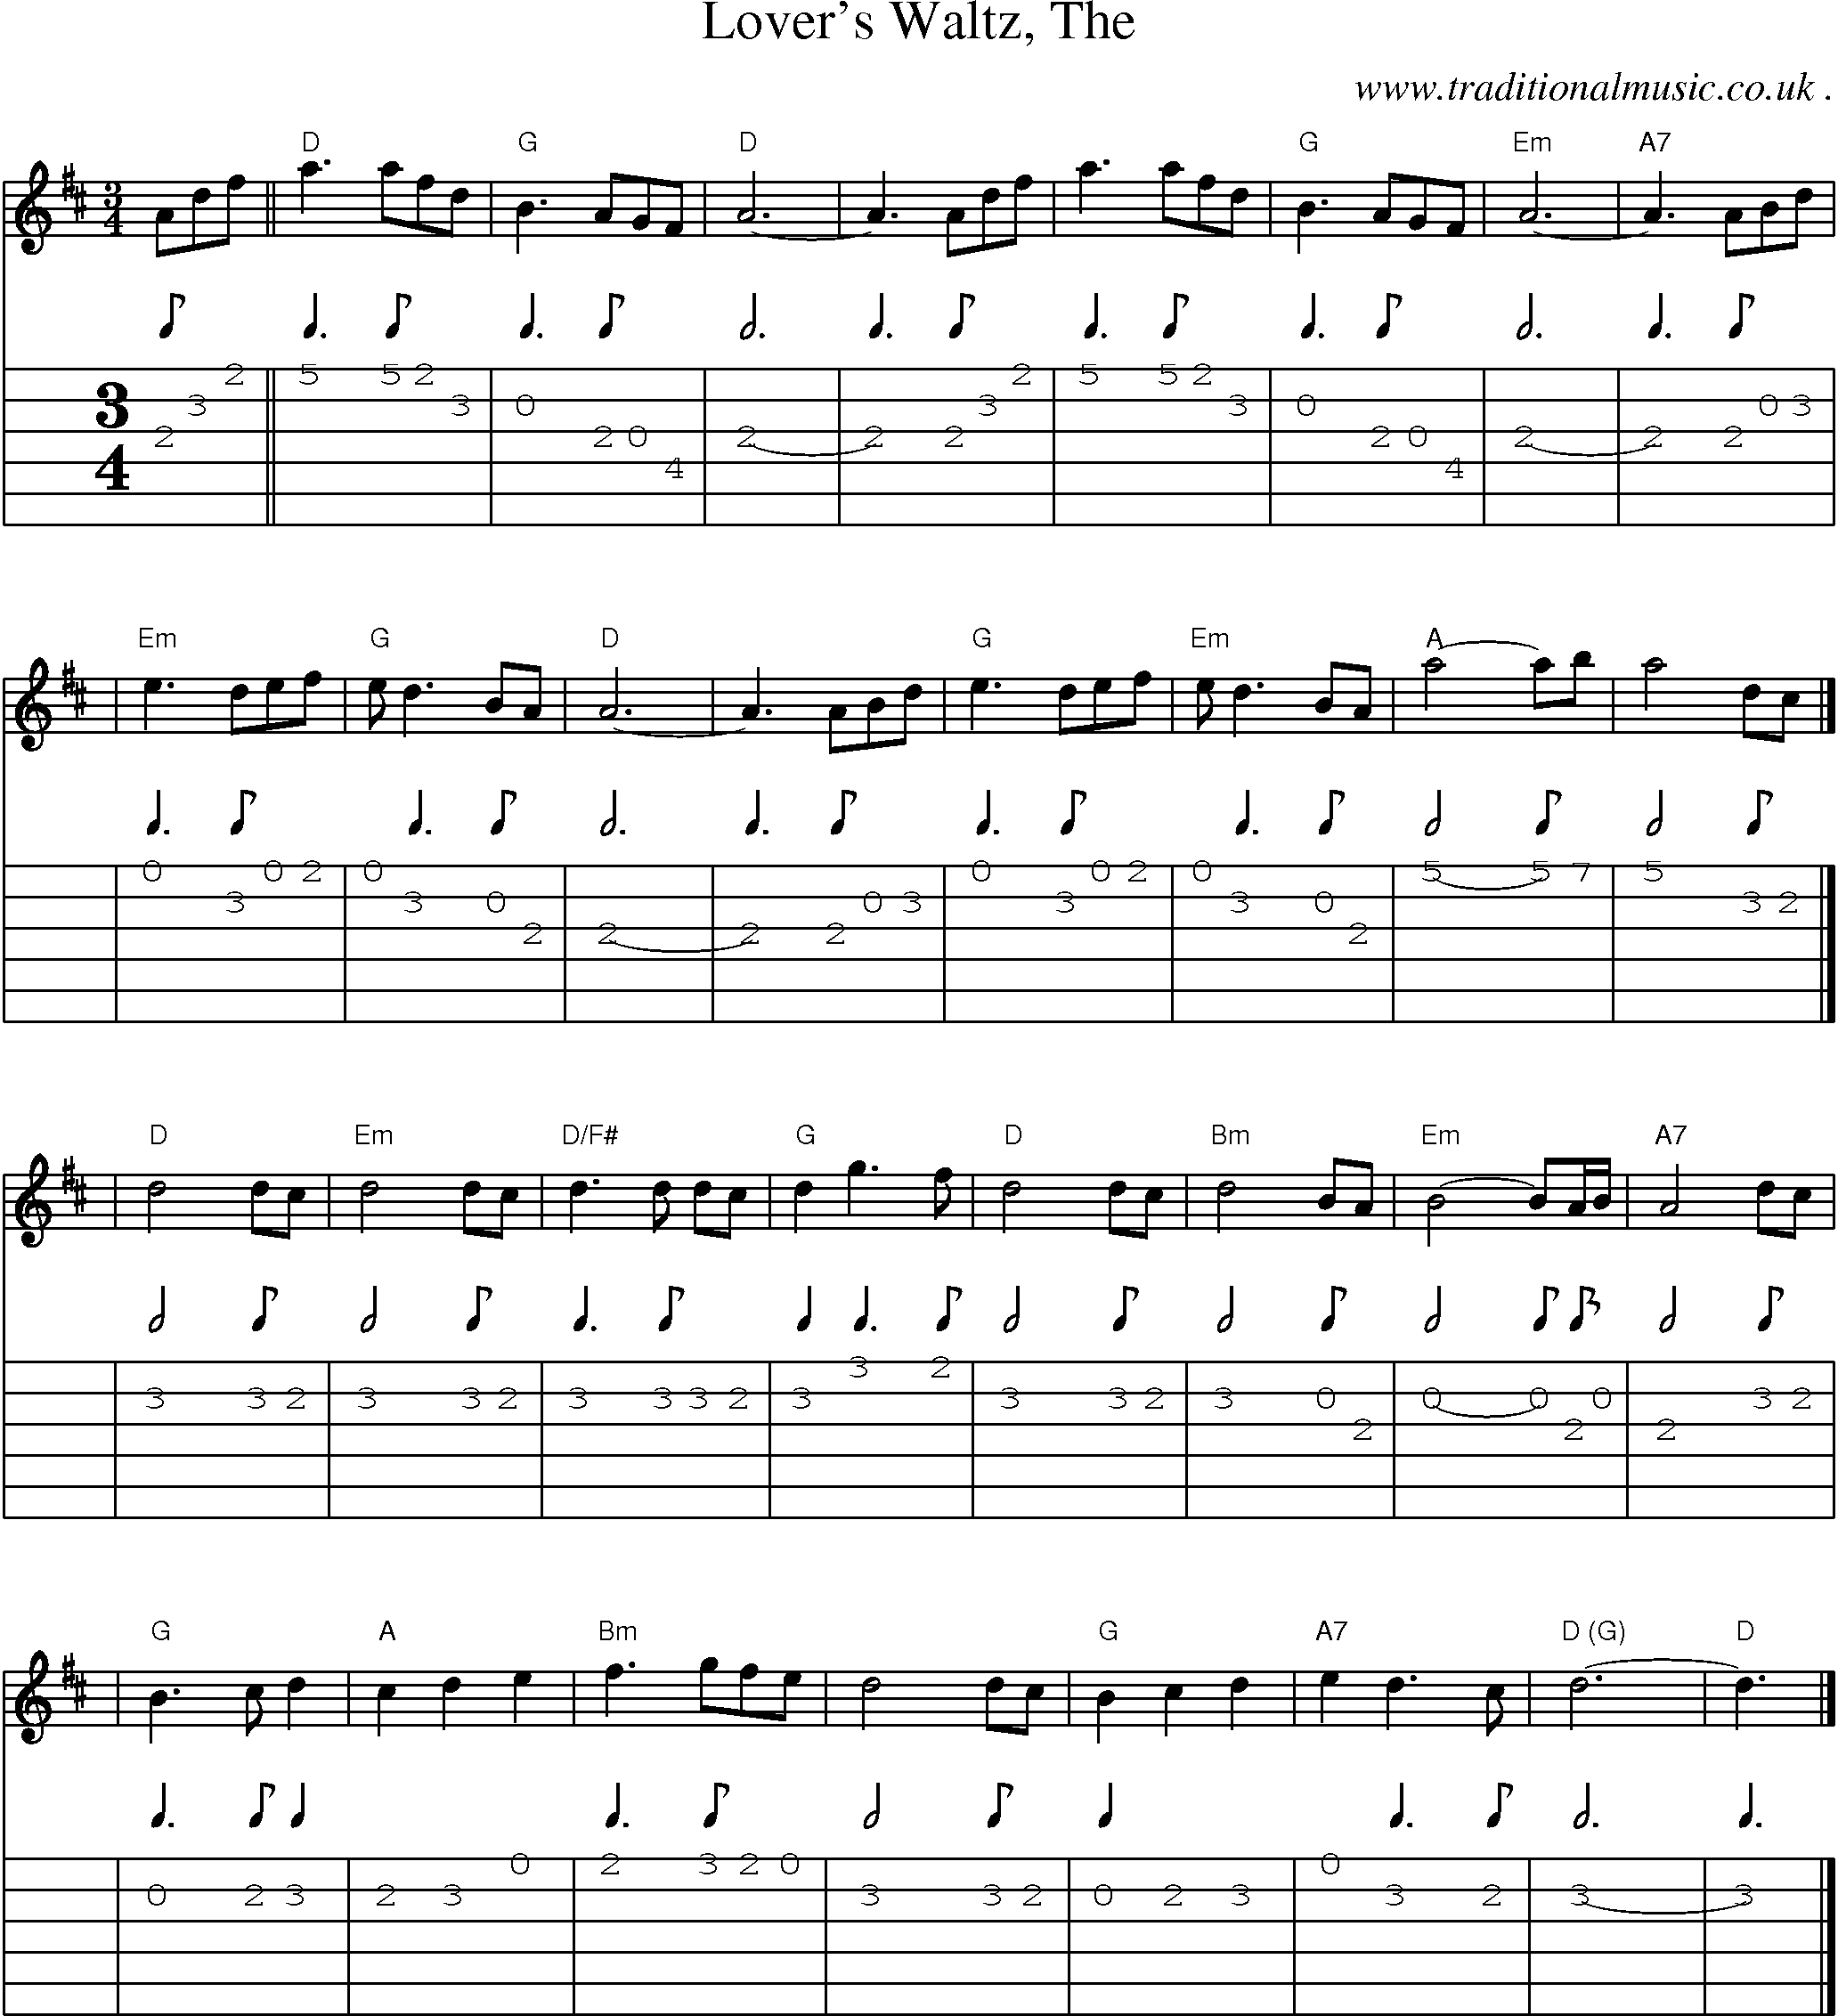 Sheet-music  score, Chords and Guitar Tabs for Lovers Waltz The